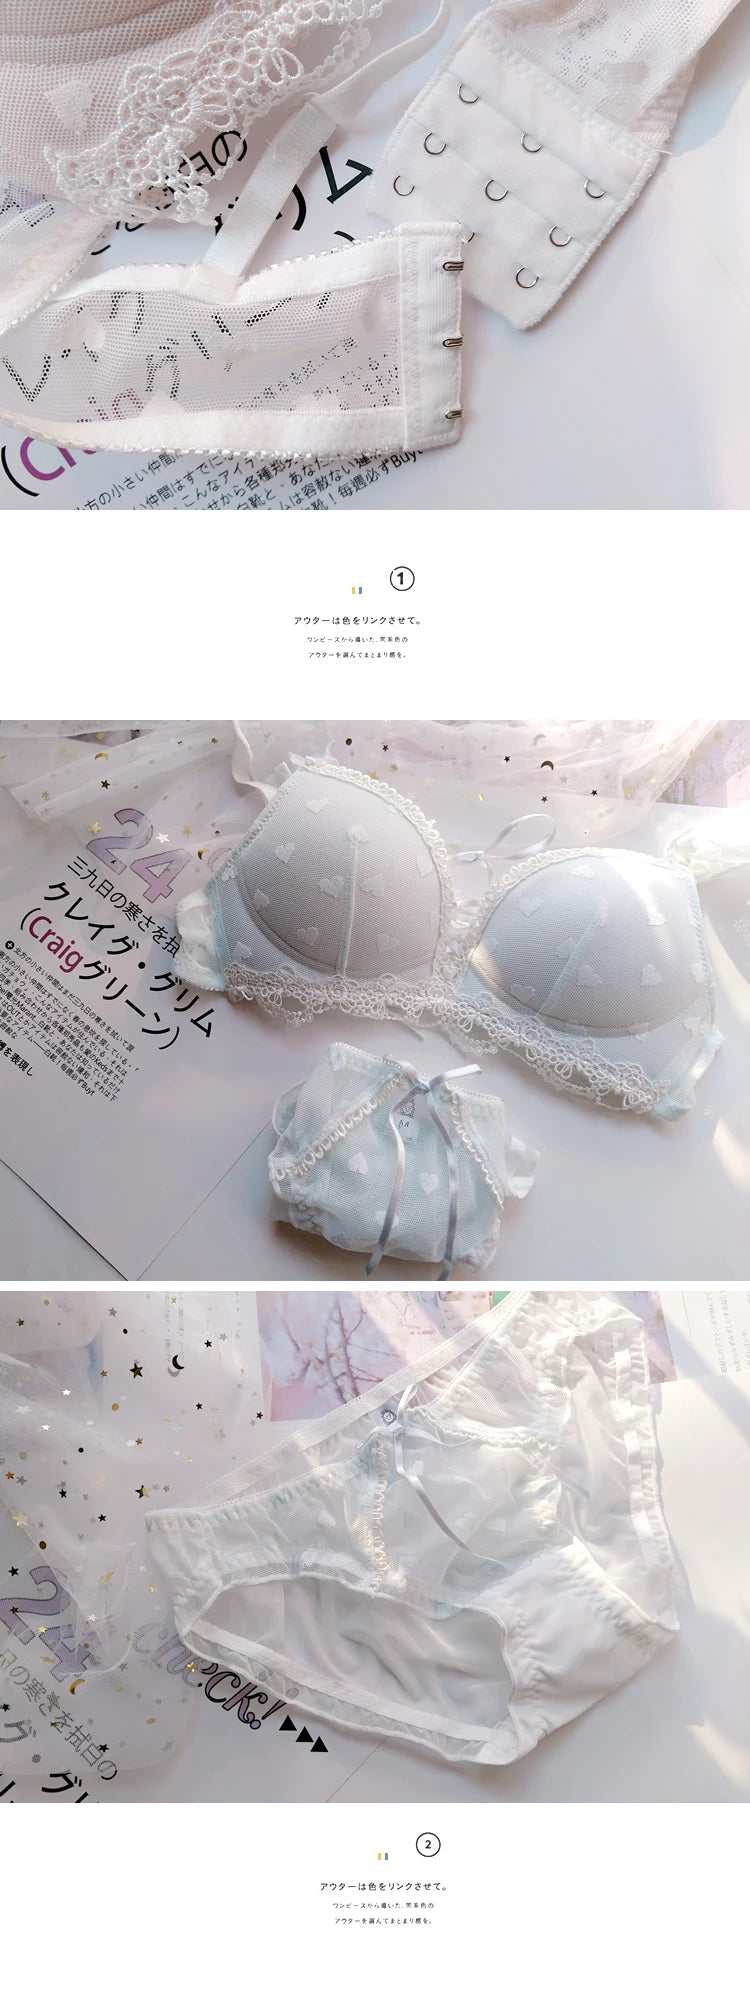 Harajuku Kawaii Fashion Japanese Heart Lace Lingerie Set - Kawaii Stop - Aesthetic, Confidence, Cute, Hair Accessory, Harajuku Fashion, Heart Embroidery, Kawaii, Lingerie Set, Lolita Style, Love Dot Pattern, Low-Waisted Briefs, Polyester, Push-Up Bra, Romance, Spandex, Special Occasions, Sweet, Unlined, Wire-Free, Women's Underwear